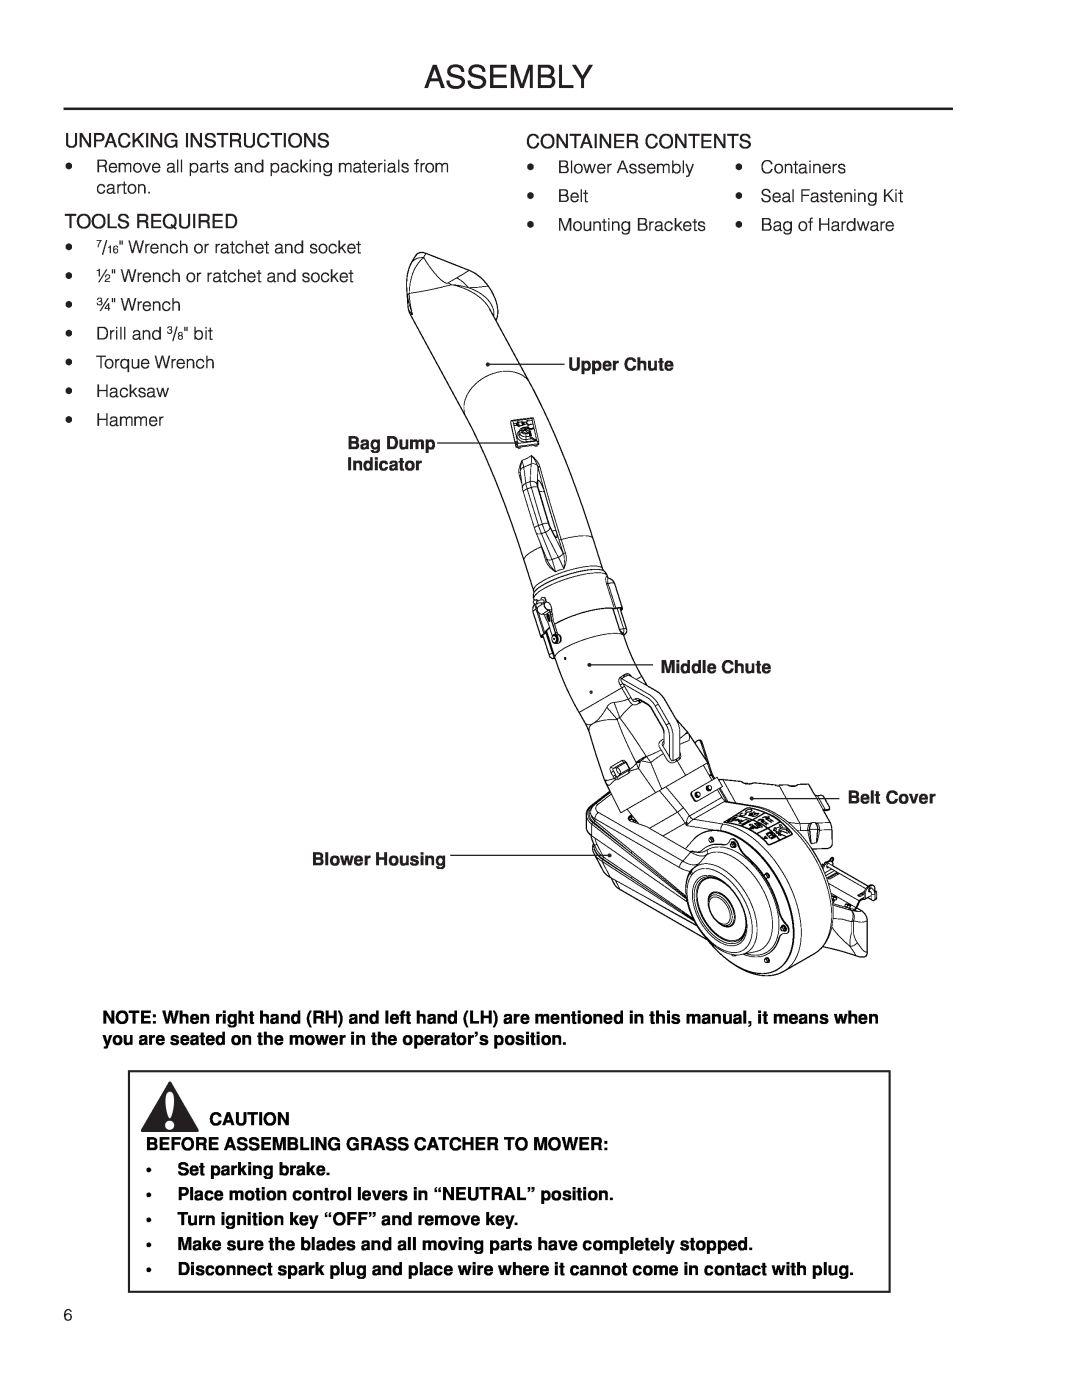 Husqvarna 966529103 manual Assembly, Unpacking Instructions, Container Contents, Tools Required 